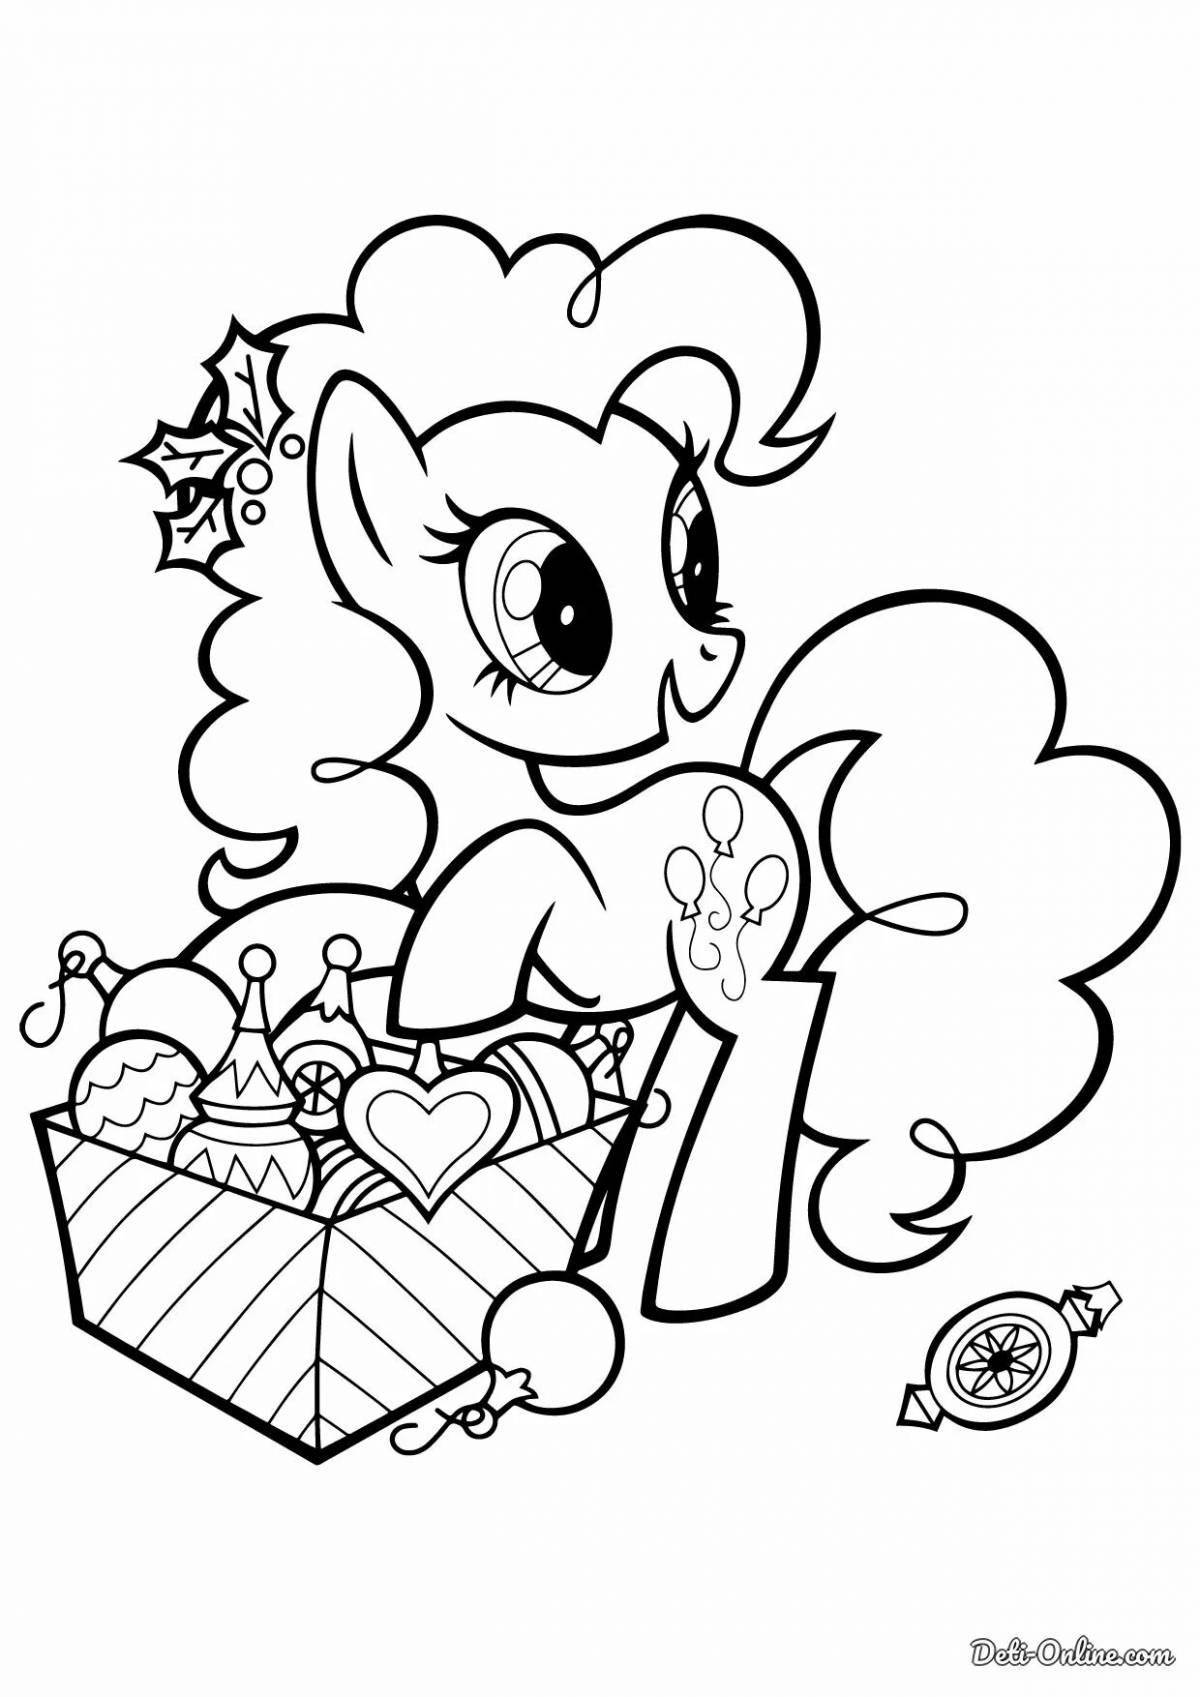 Playful pinkie pie coloring page for girls